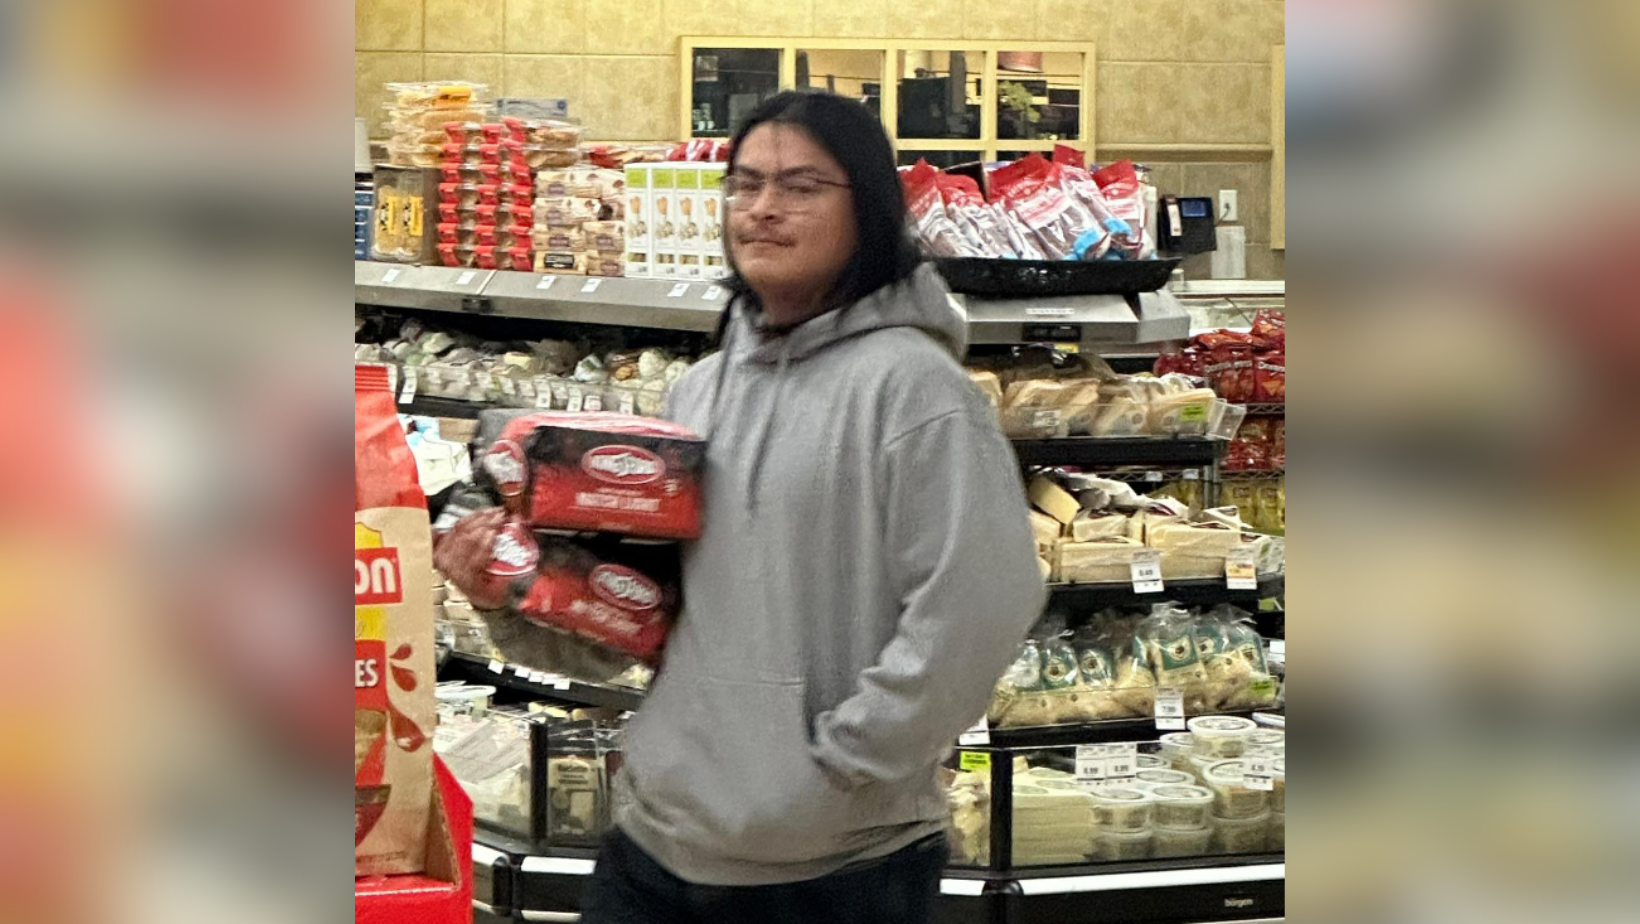 Gilroy Police Seek Public's Aid in Identifying Suspect in Nob Hill